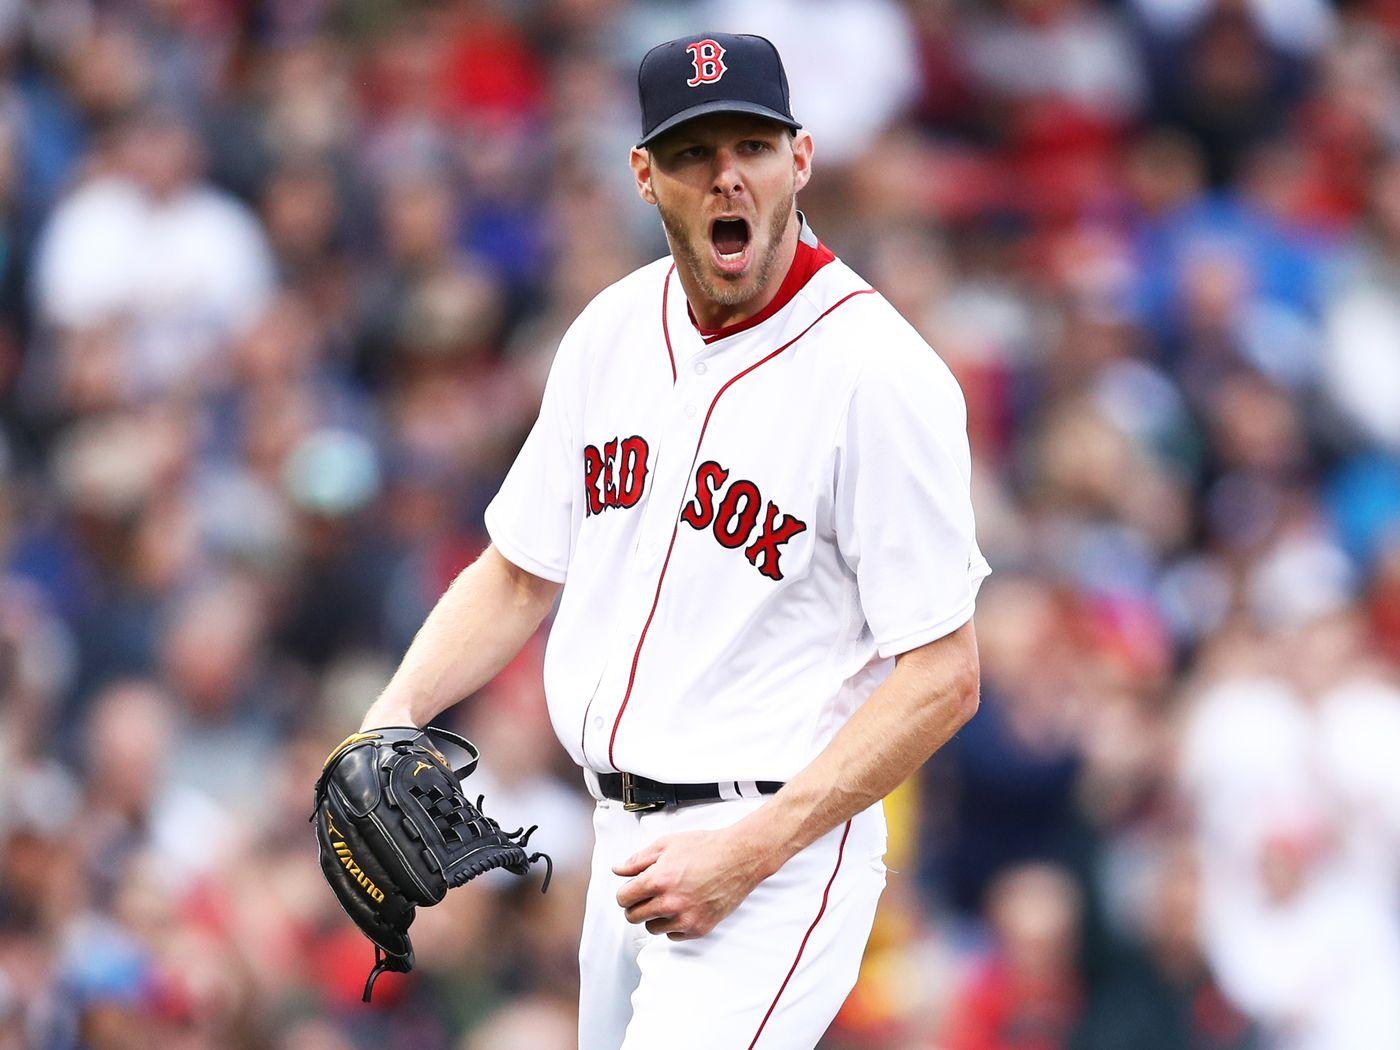 Red Sox Rays 1: Chris Sale strikes out takes my breath away